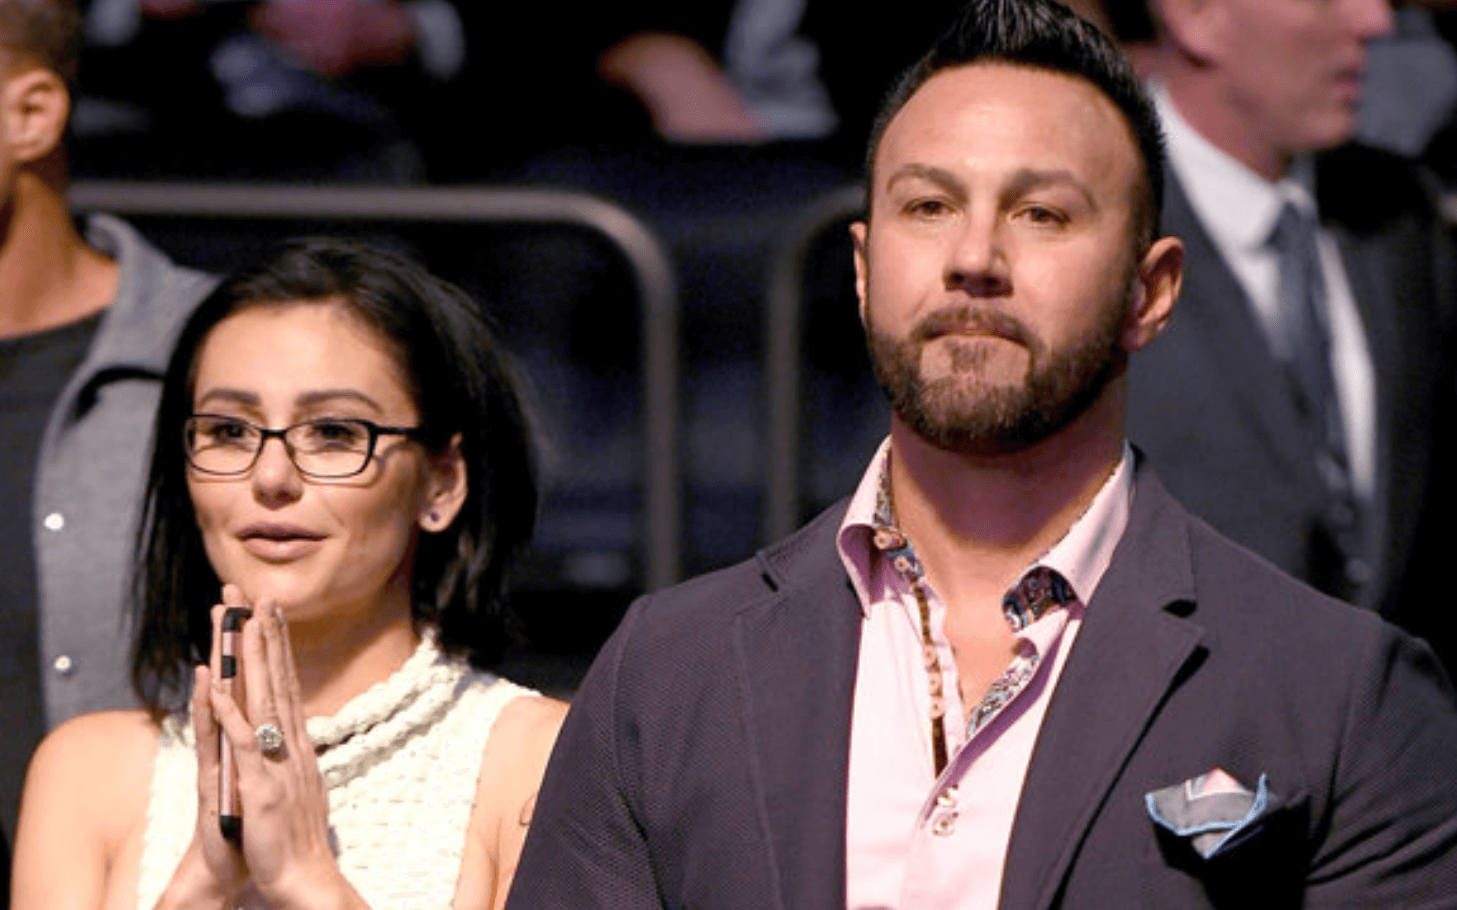 VIDEOS: Roger Mathews Cries After ‘Hate-Filled’ Jenni ‘JWoww’ Farley Files Restraining Order & Blocks Him From His Kids!